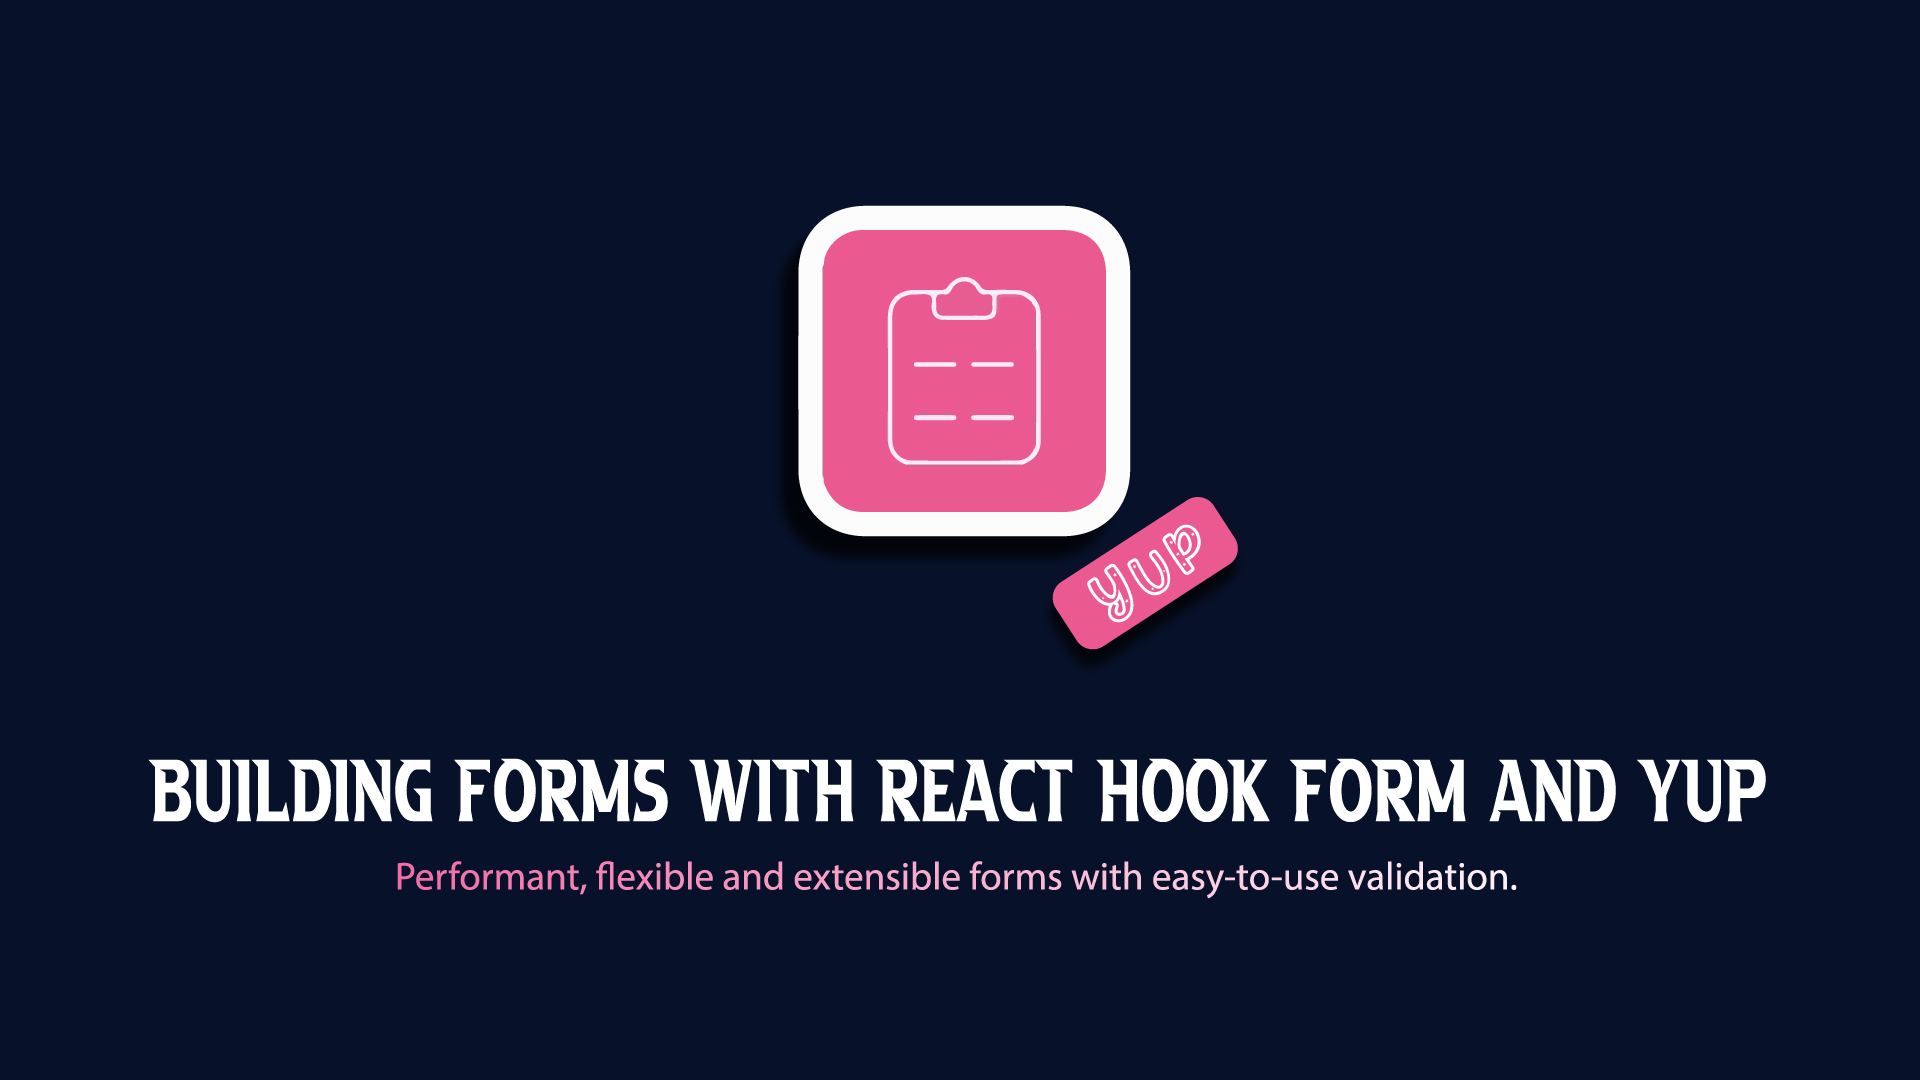 Building forms with React Hook Form and Yup